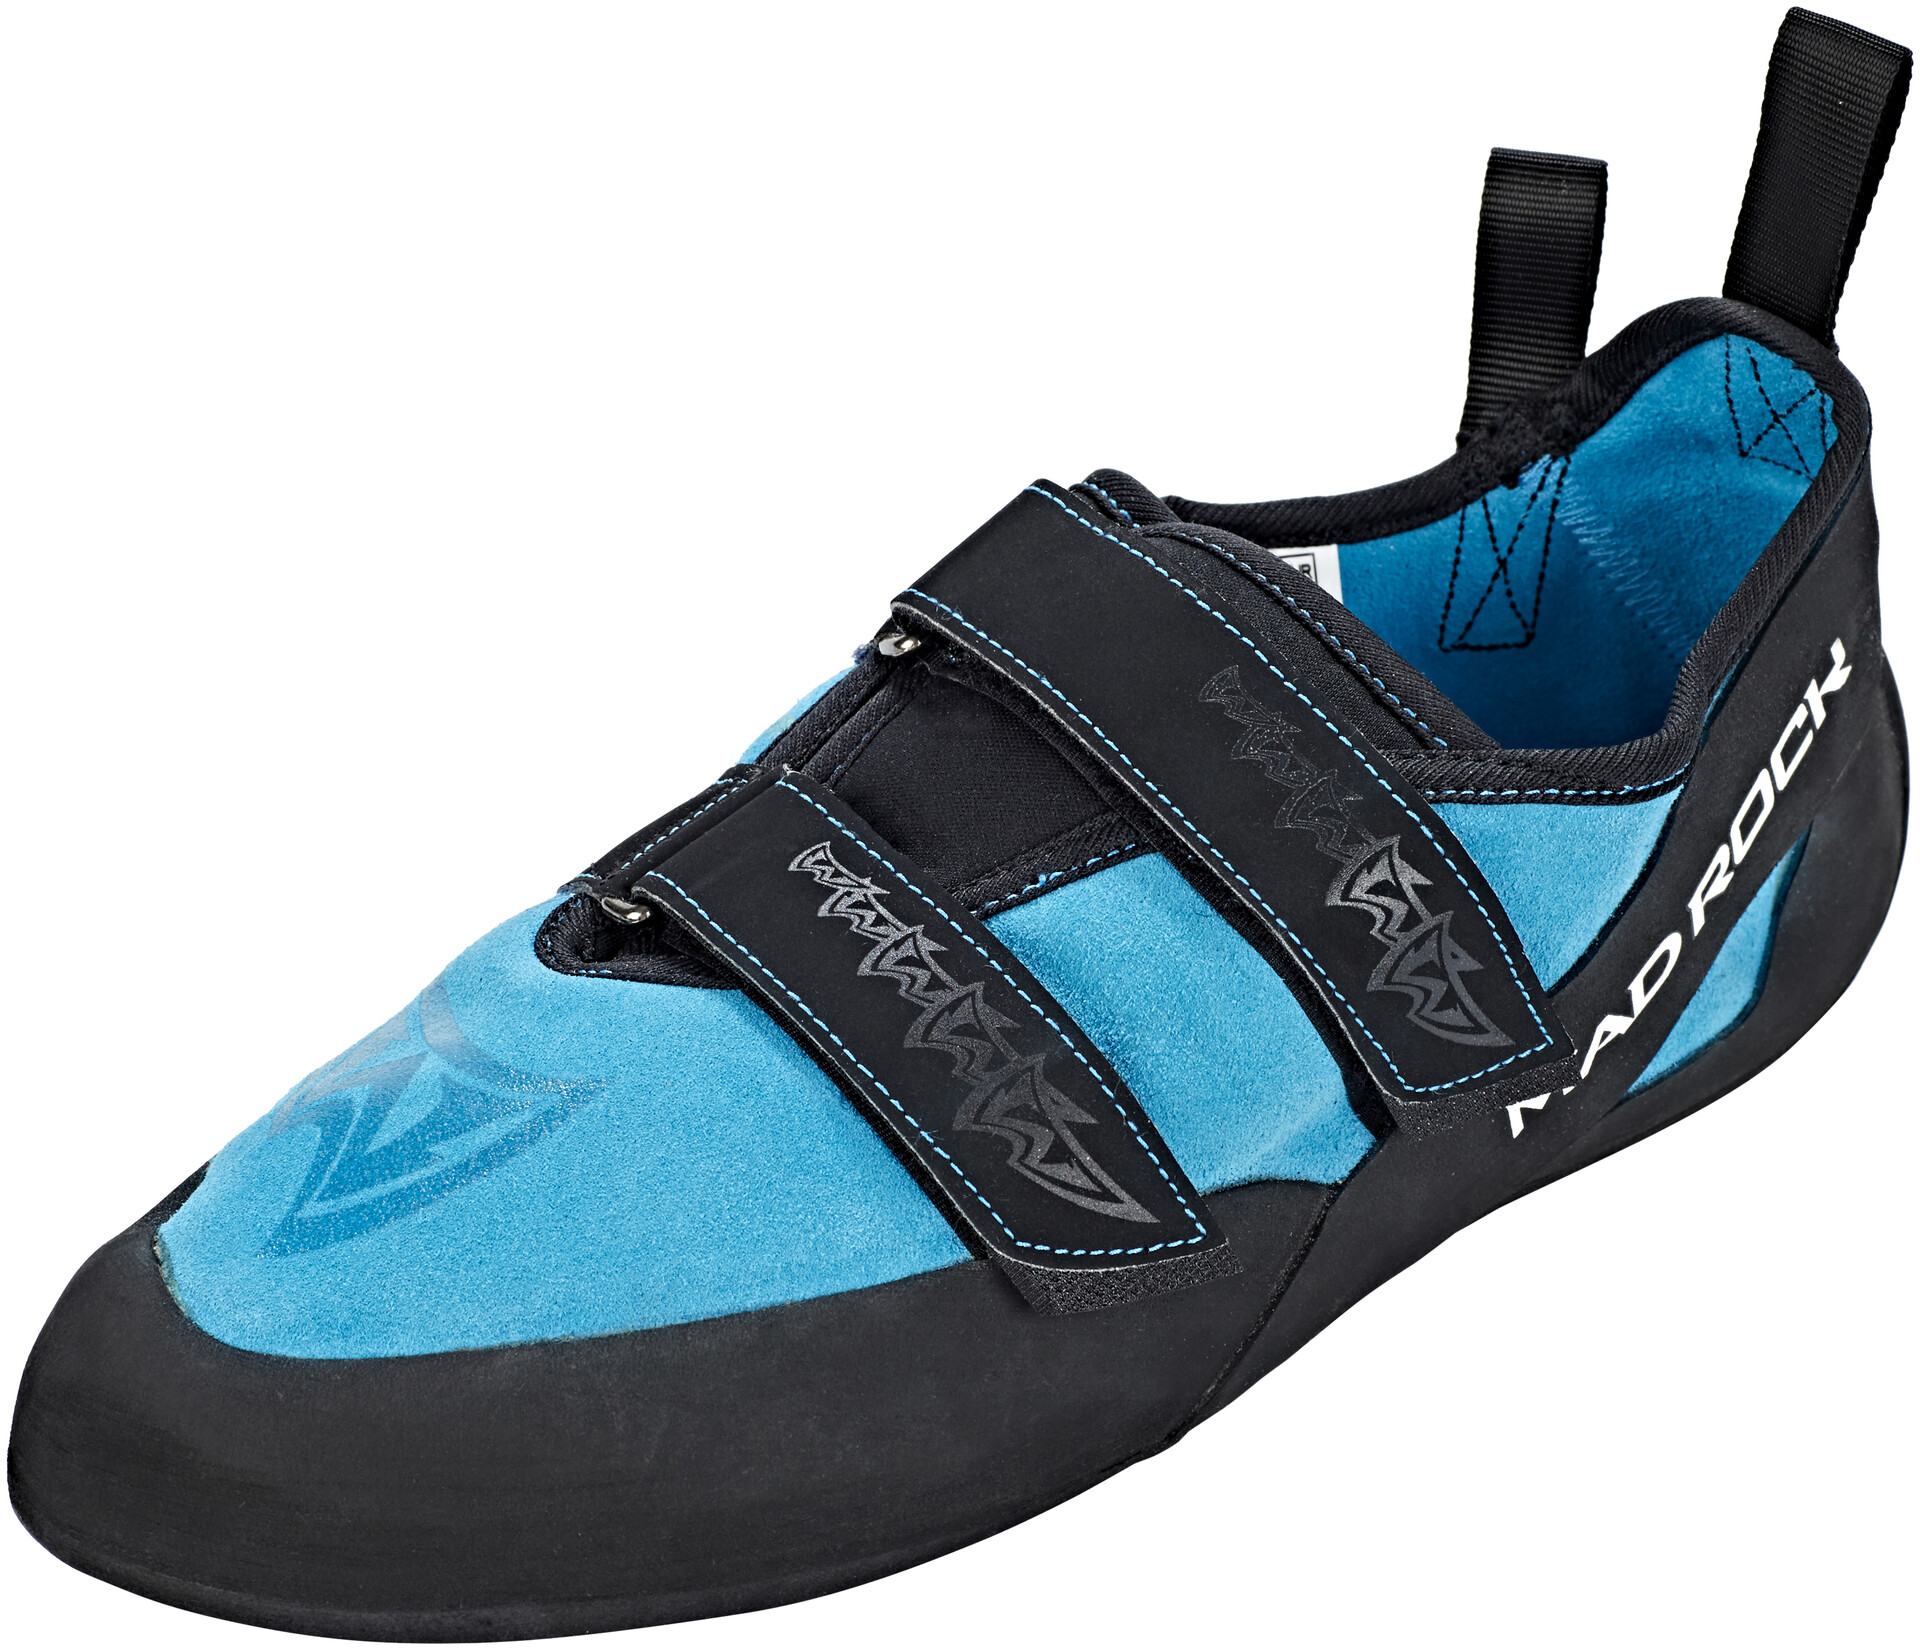 mad rock drifter shoes